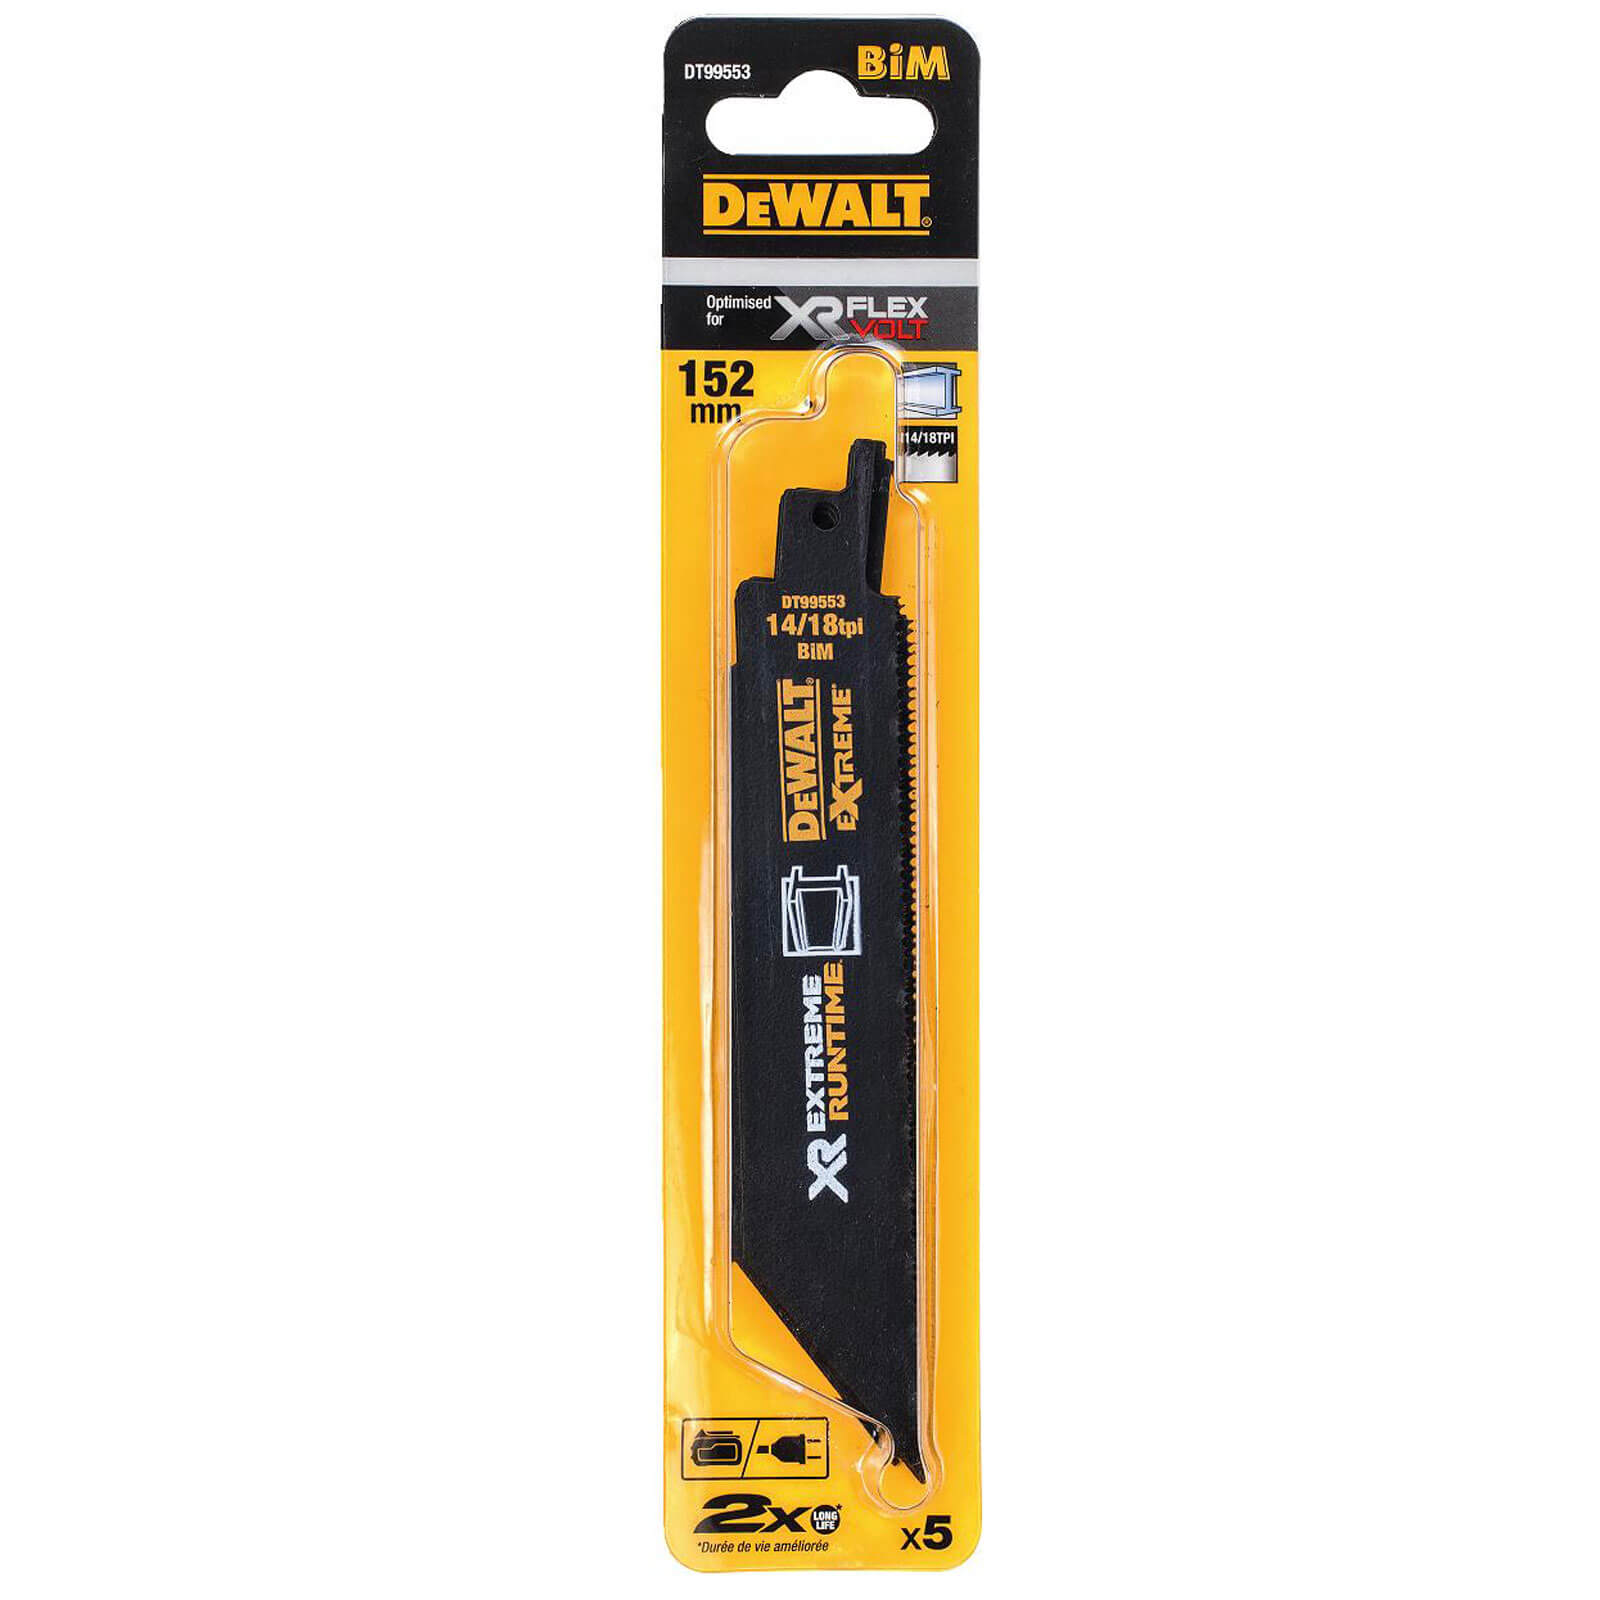 Photos - Power Tool Accessory DeWALT Extreme Runtime Metal Cutting Reciprocating Sabre Saw Blades 150mm 